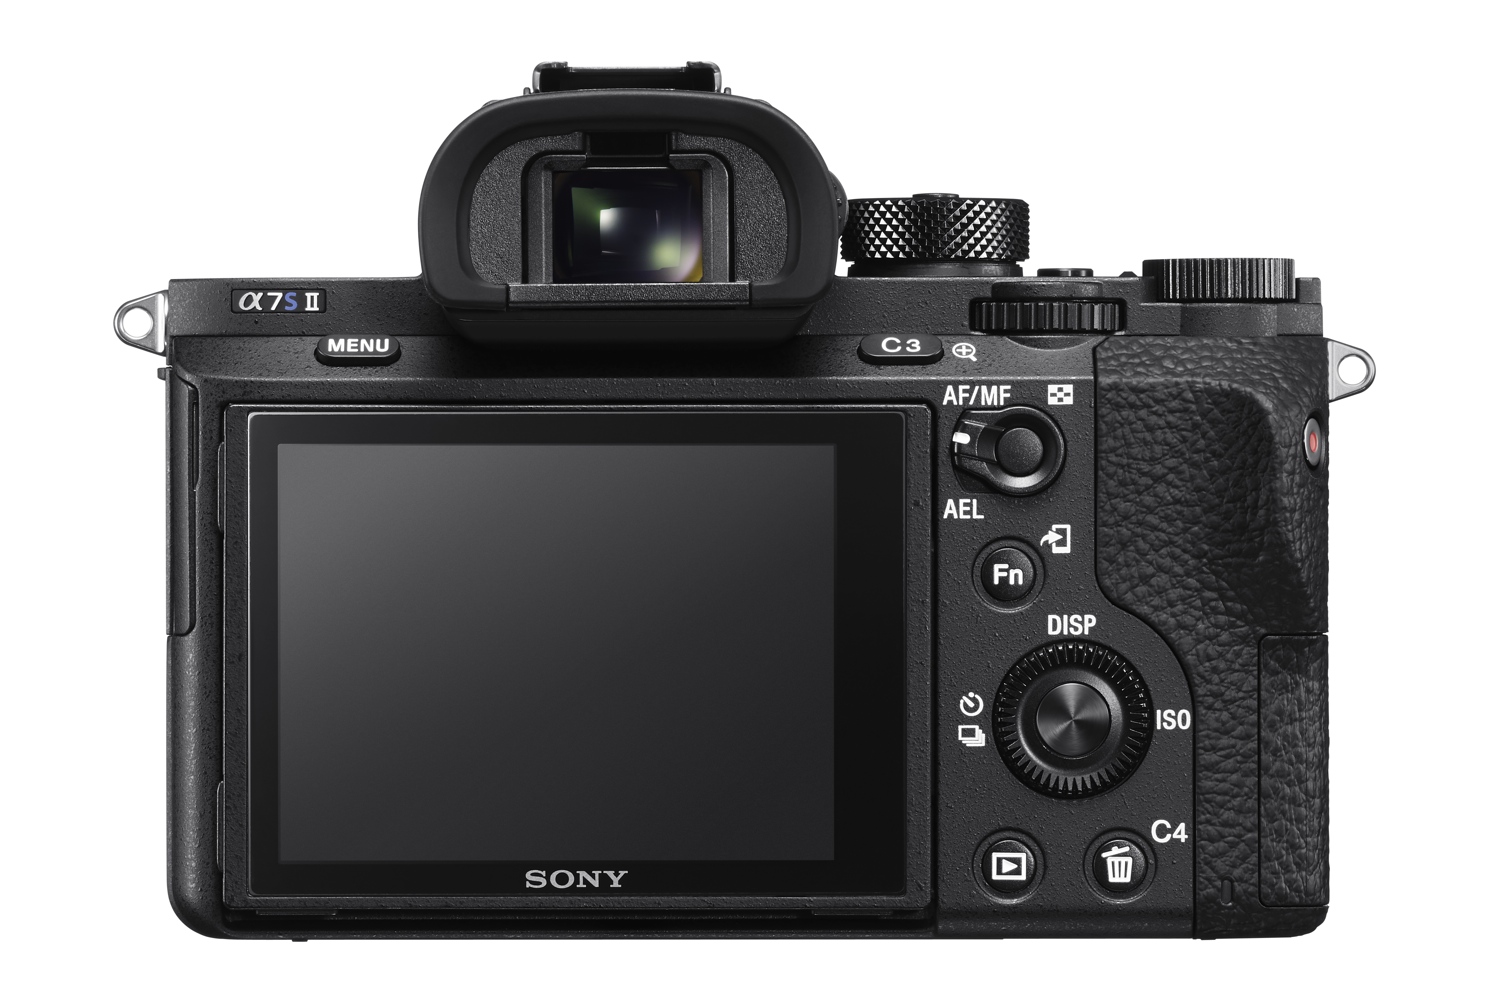 sonys high sensitivity a7s goes mark ii with 5 axis stabilization new video specs sony rear